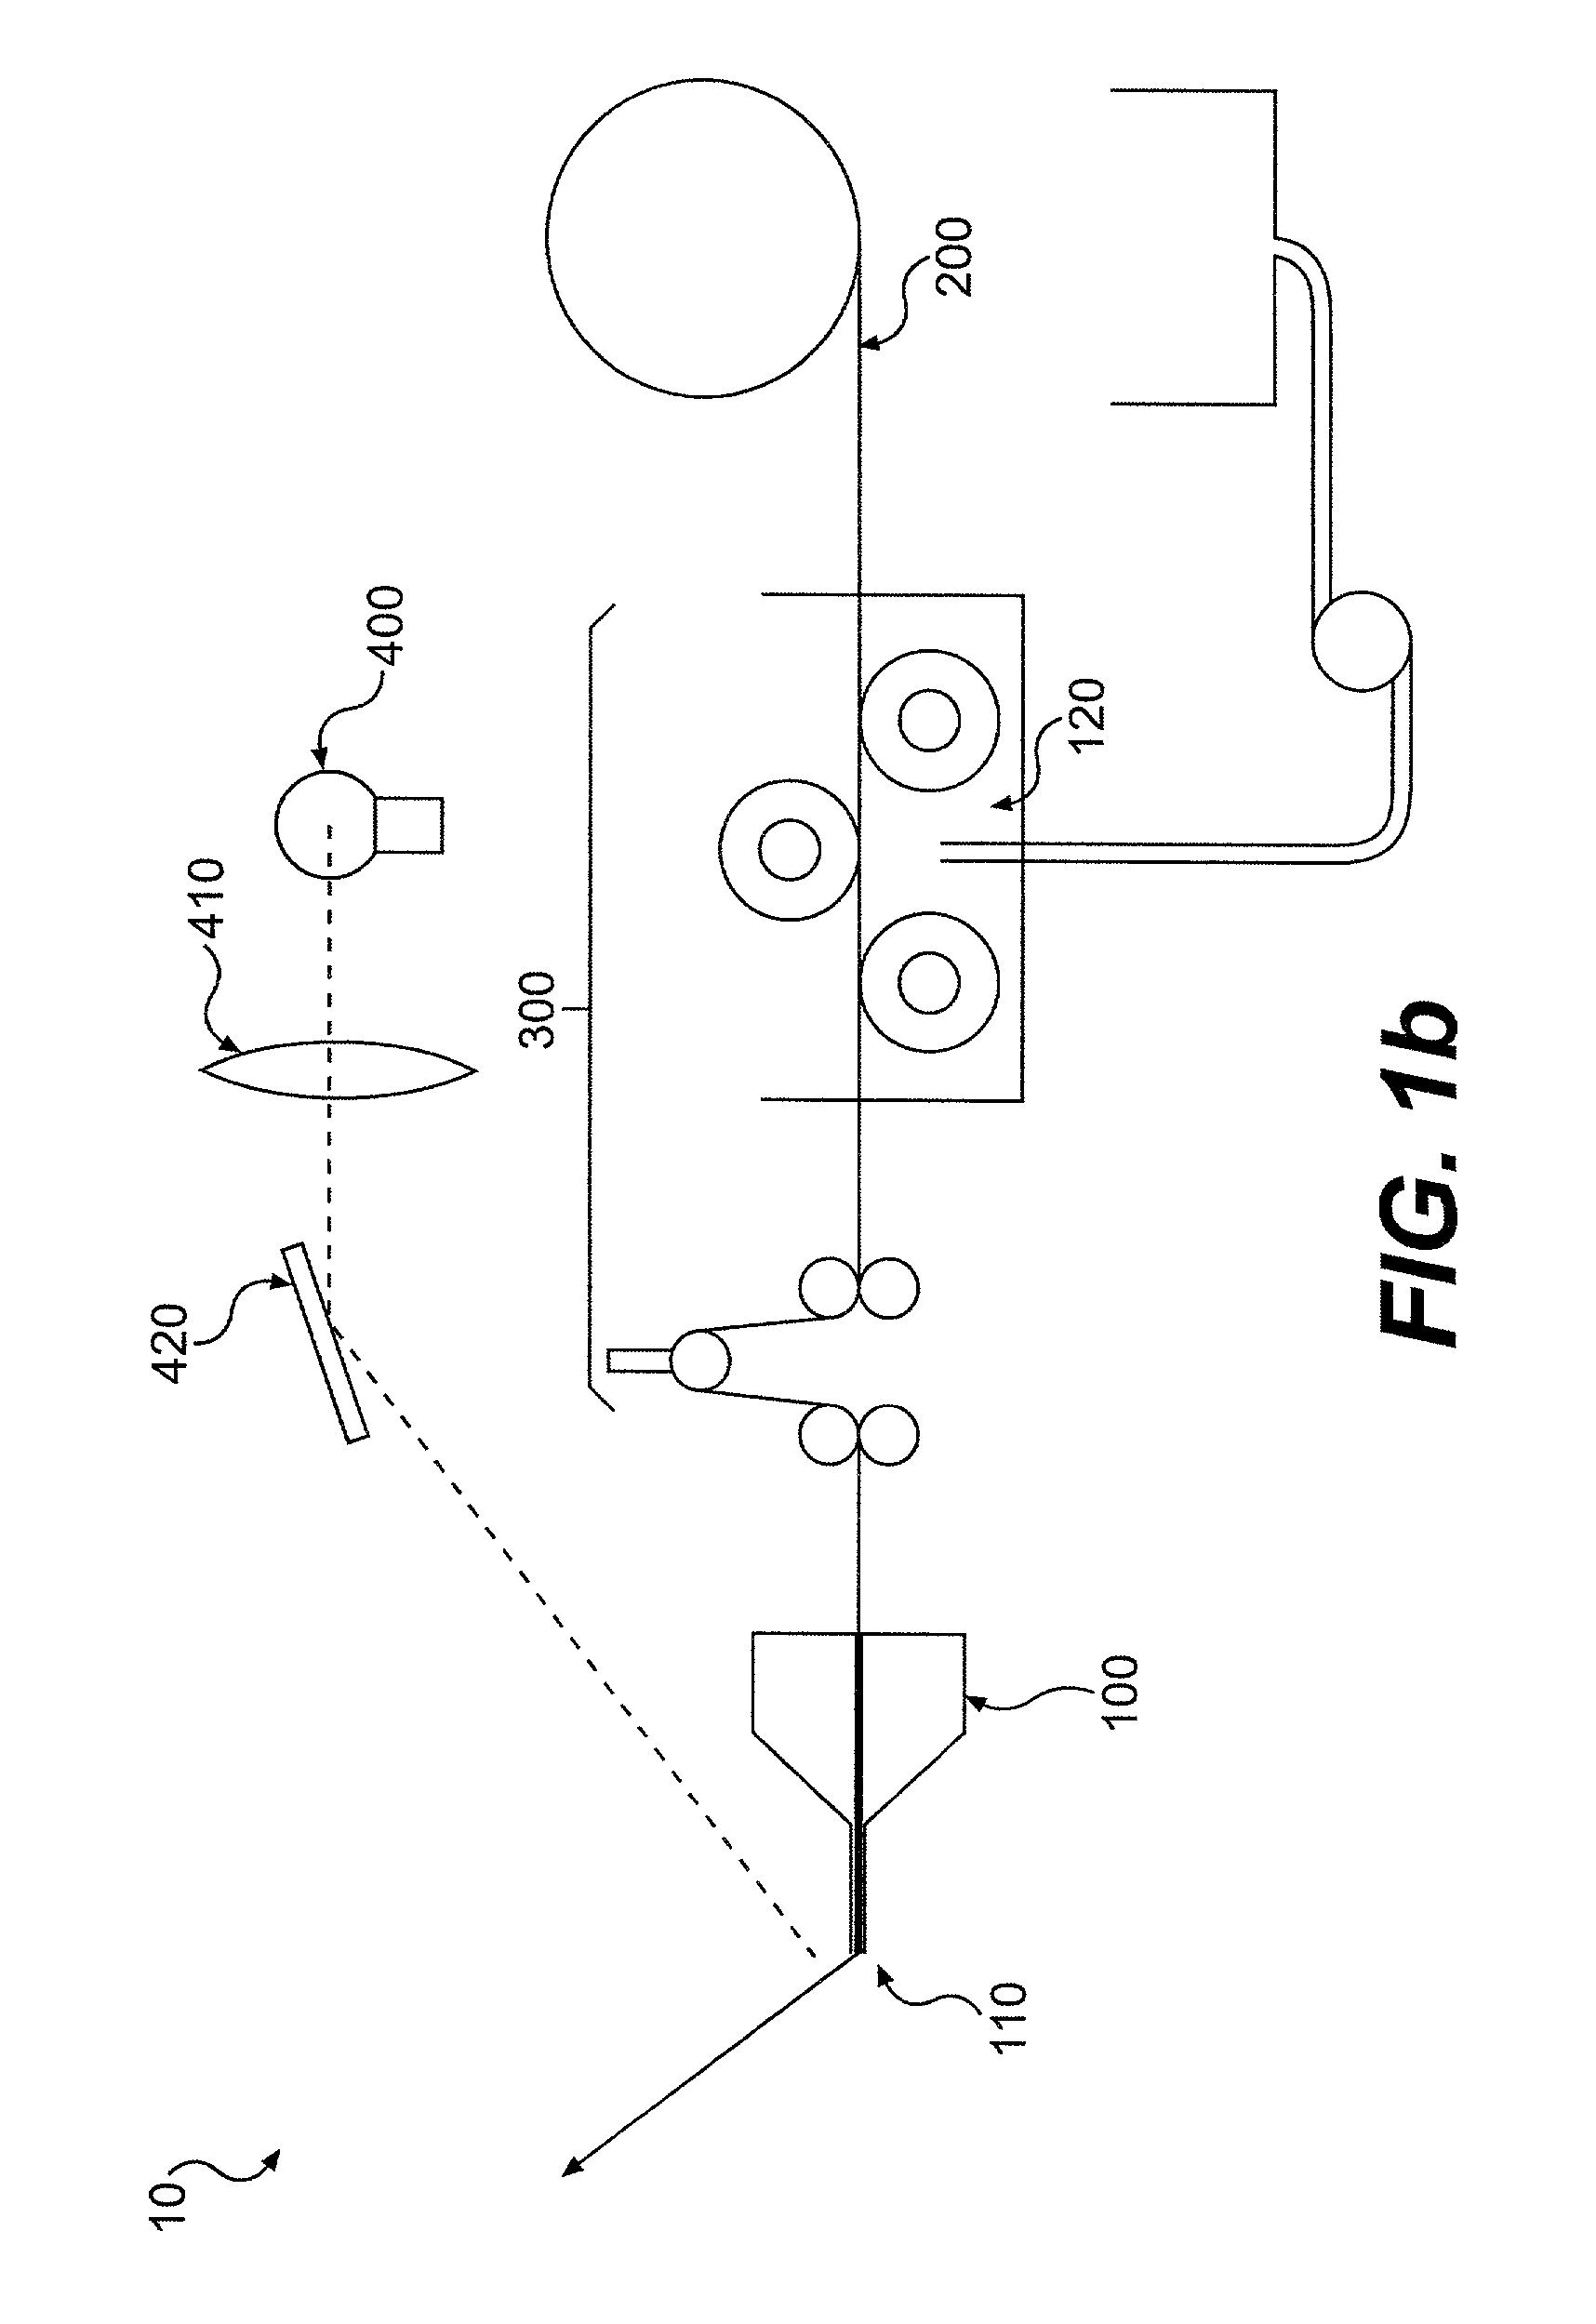 Apparatus and method of fabricating fiber reinforced plastic parts